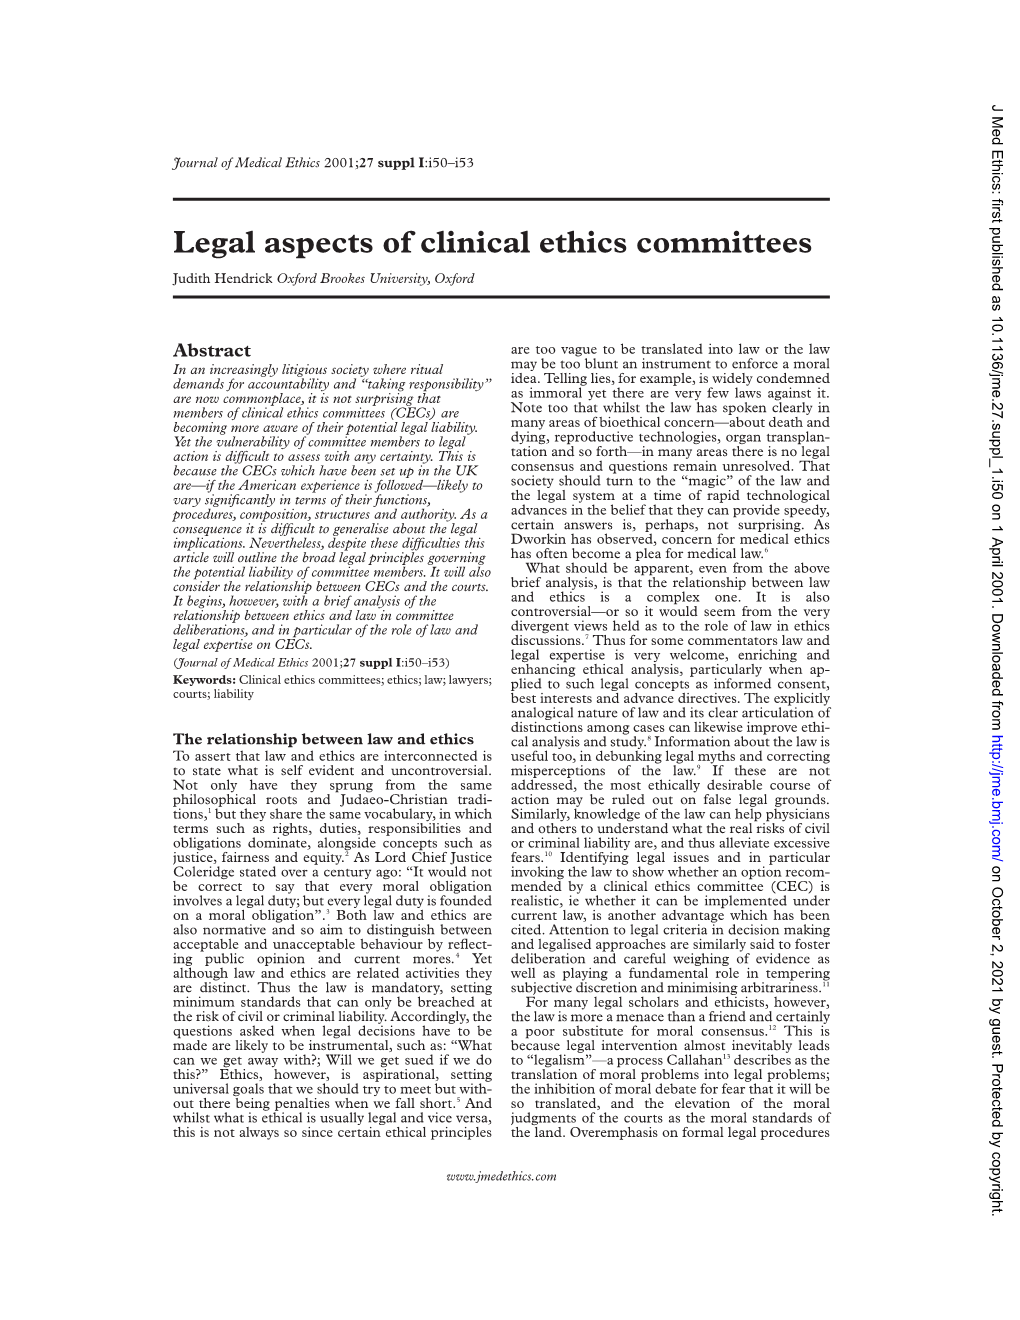 Legal Aspects of Clinical Ethics Committees Judith Hendrick Oxford Brookes University, Oxford